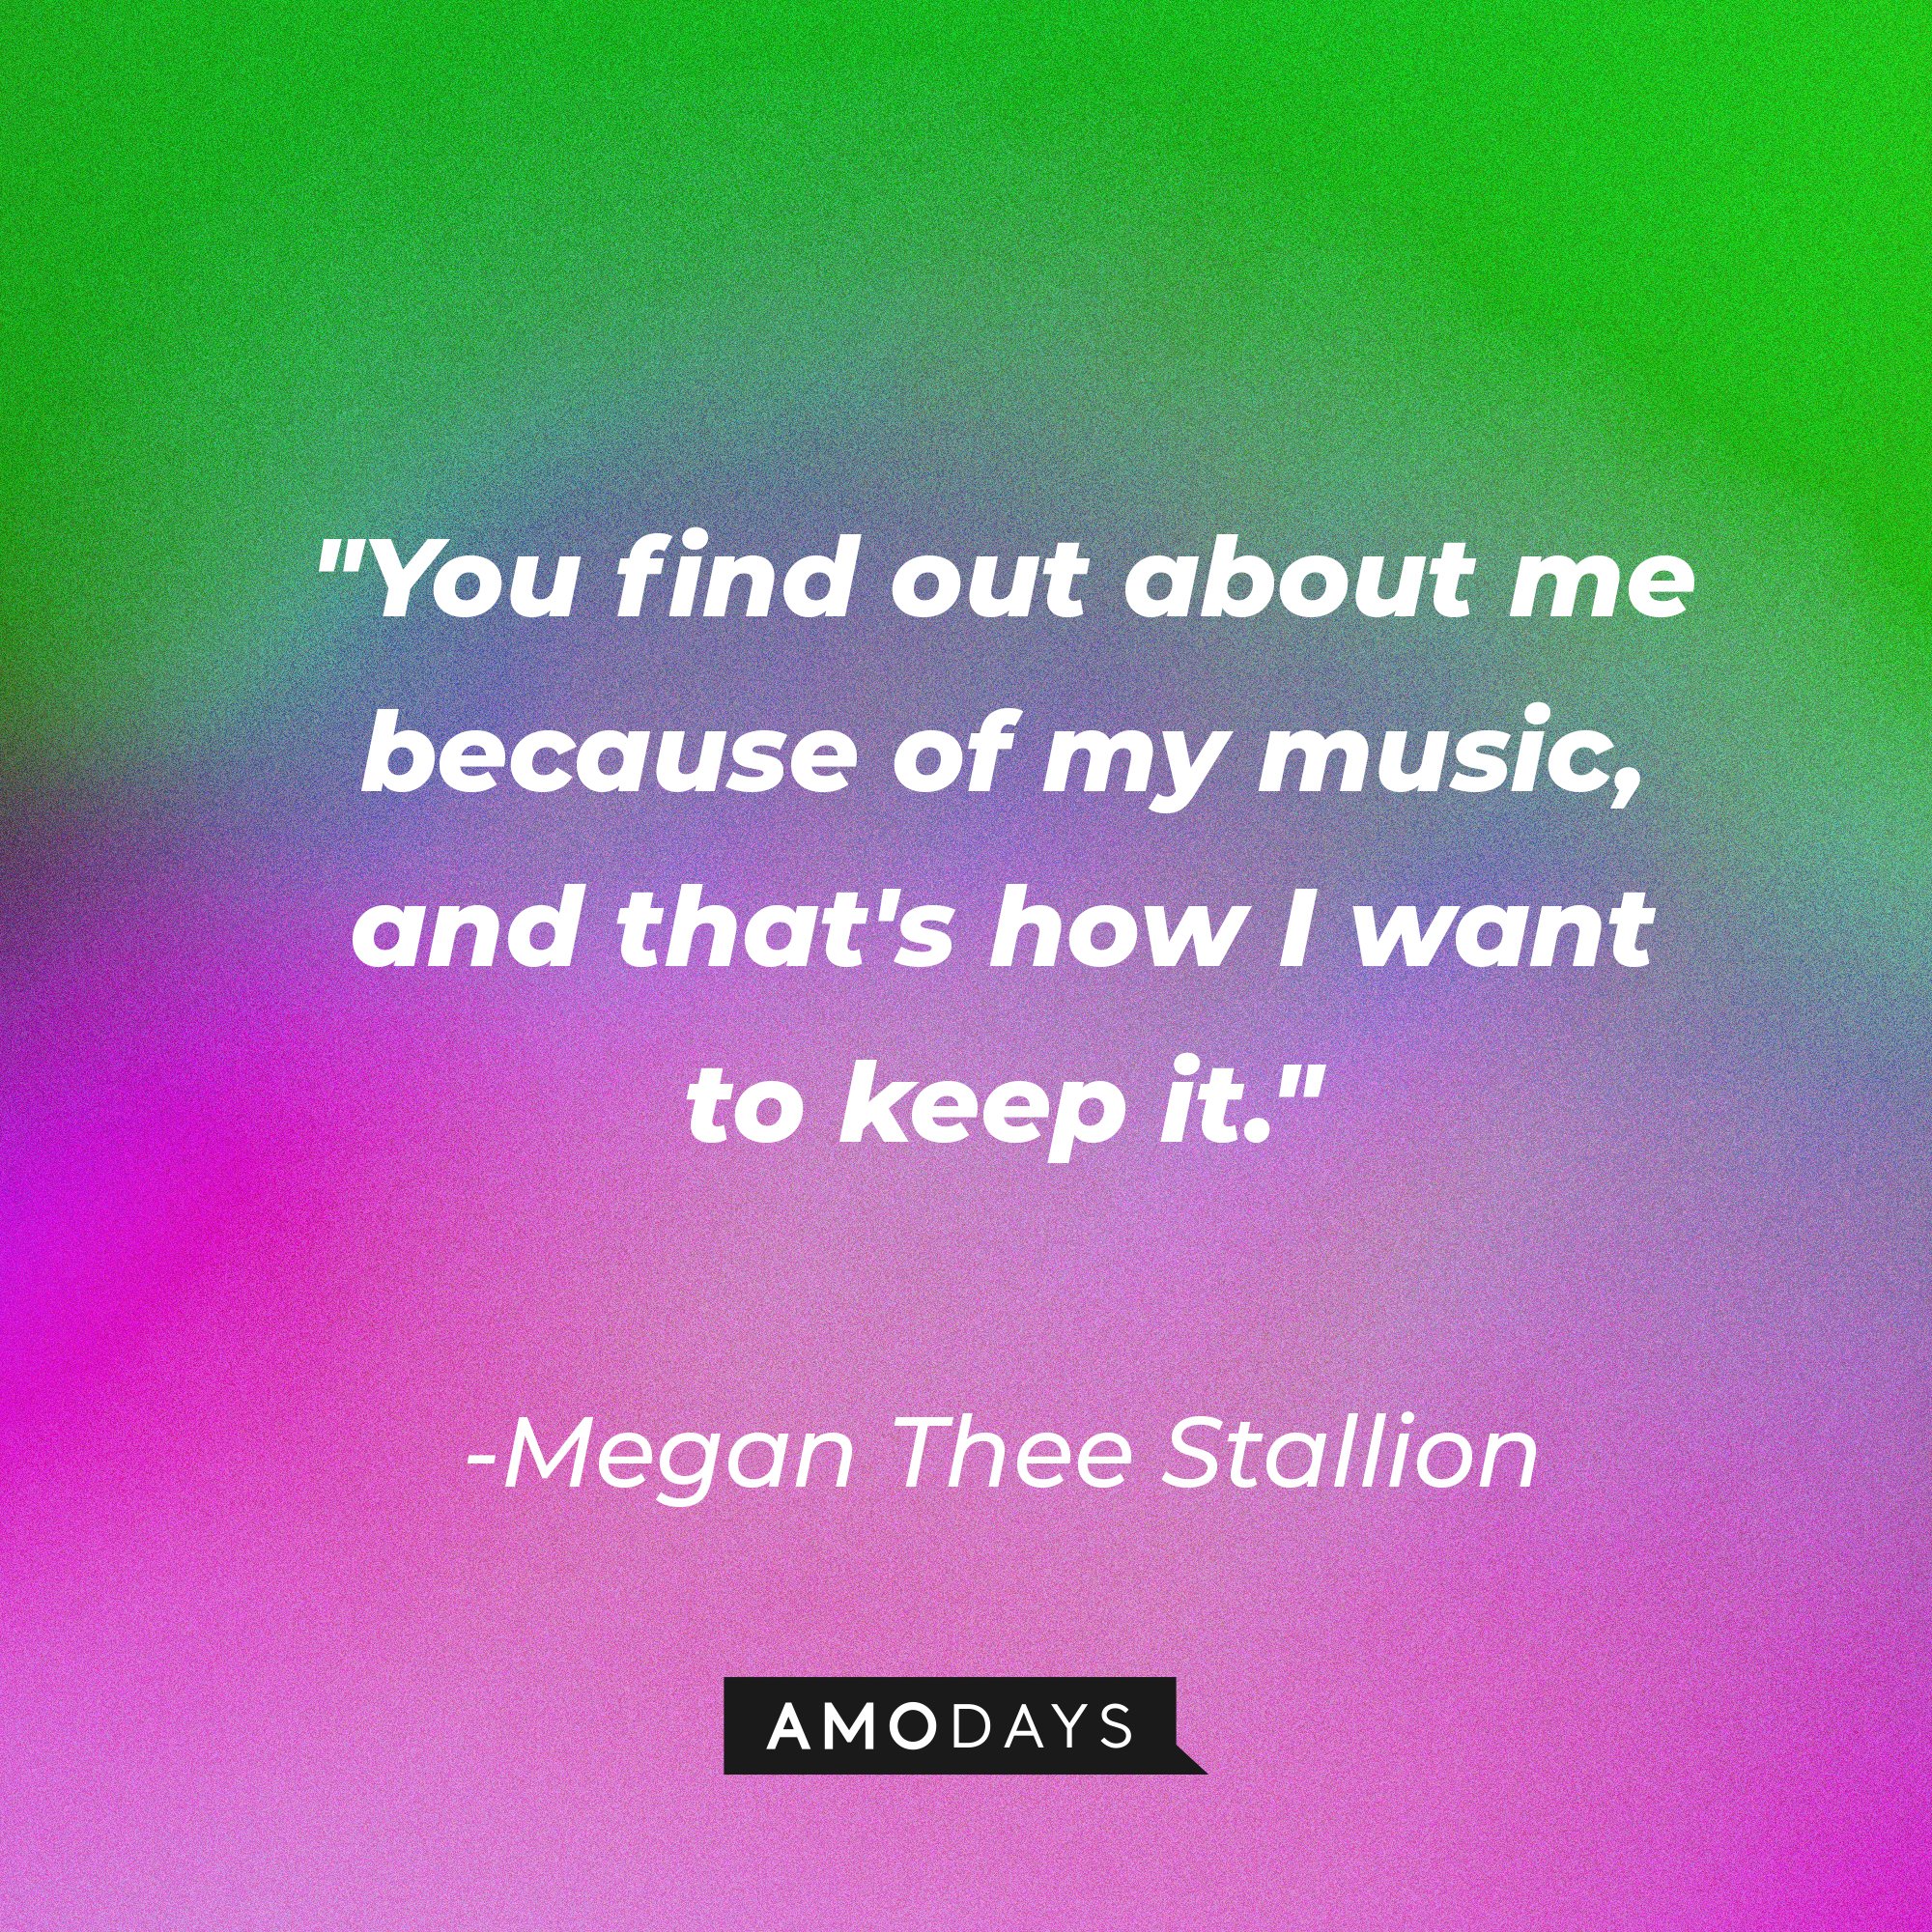 Megan Thee Stallion’s quote: "You find out about me because of my music, and that's how I want to keep it." | Image: AmoDays 